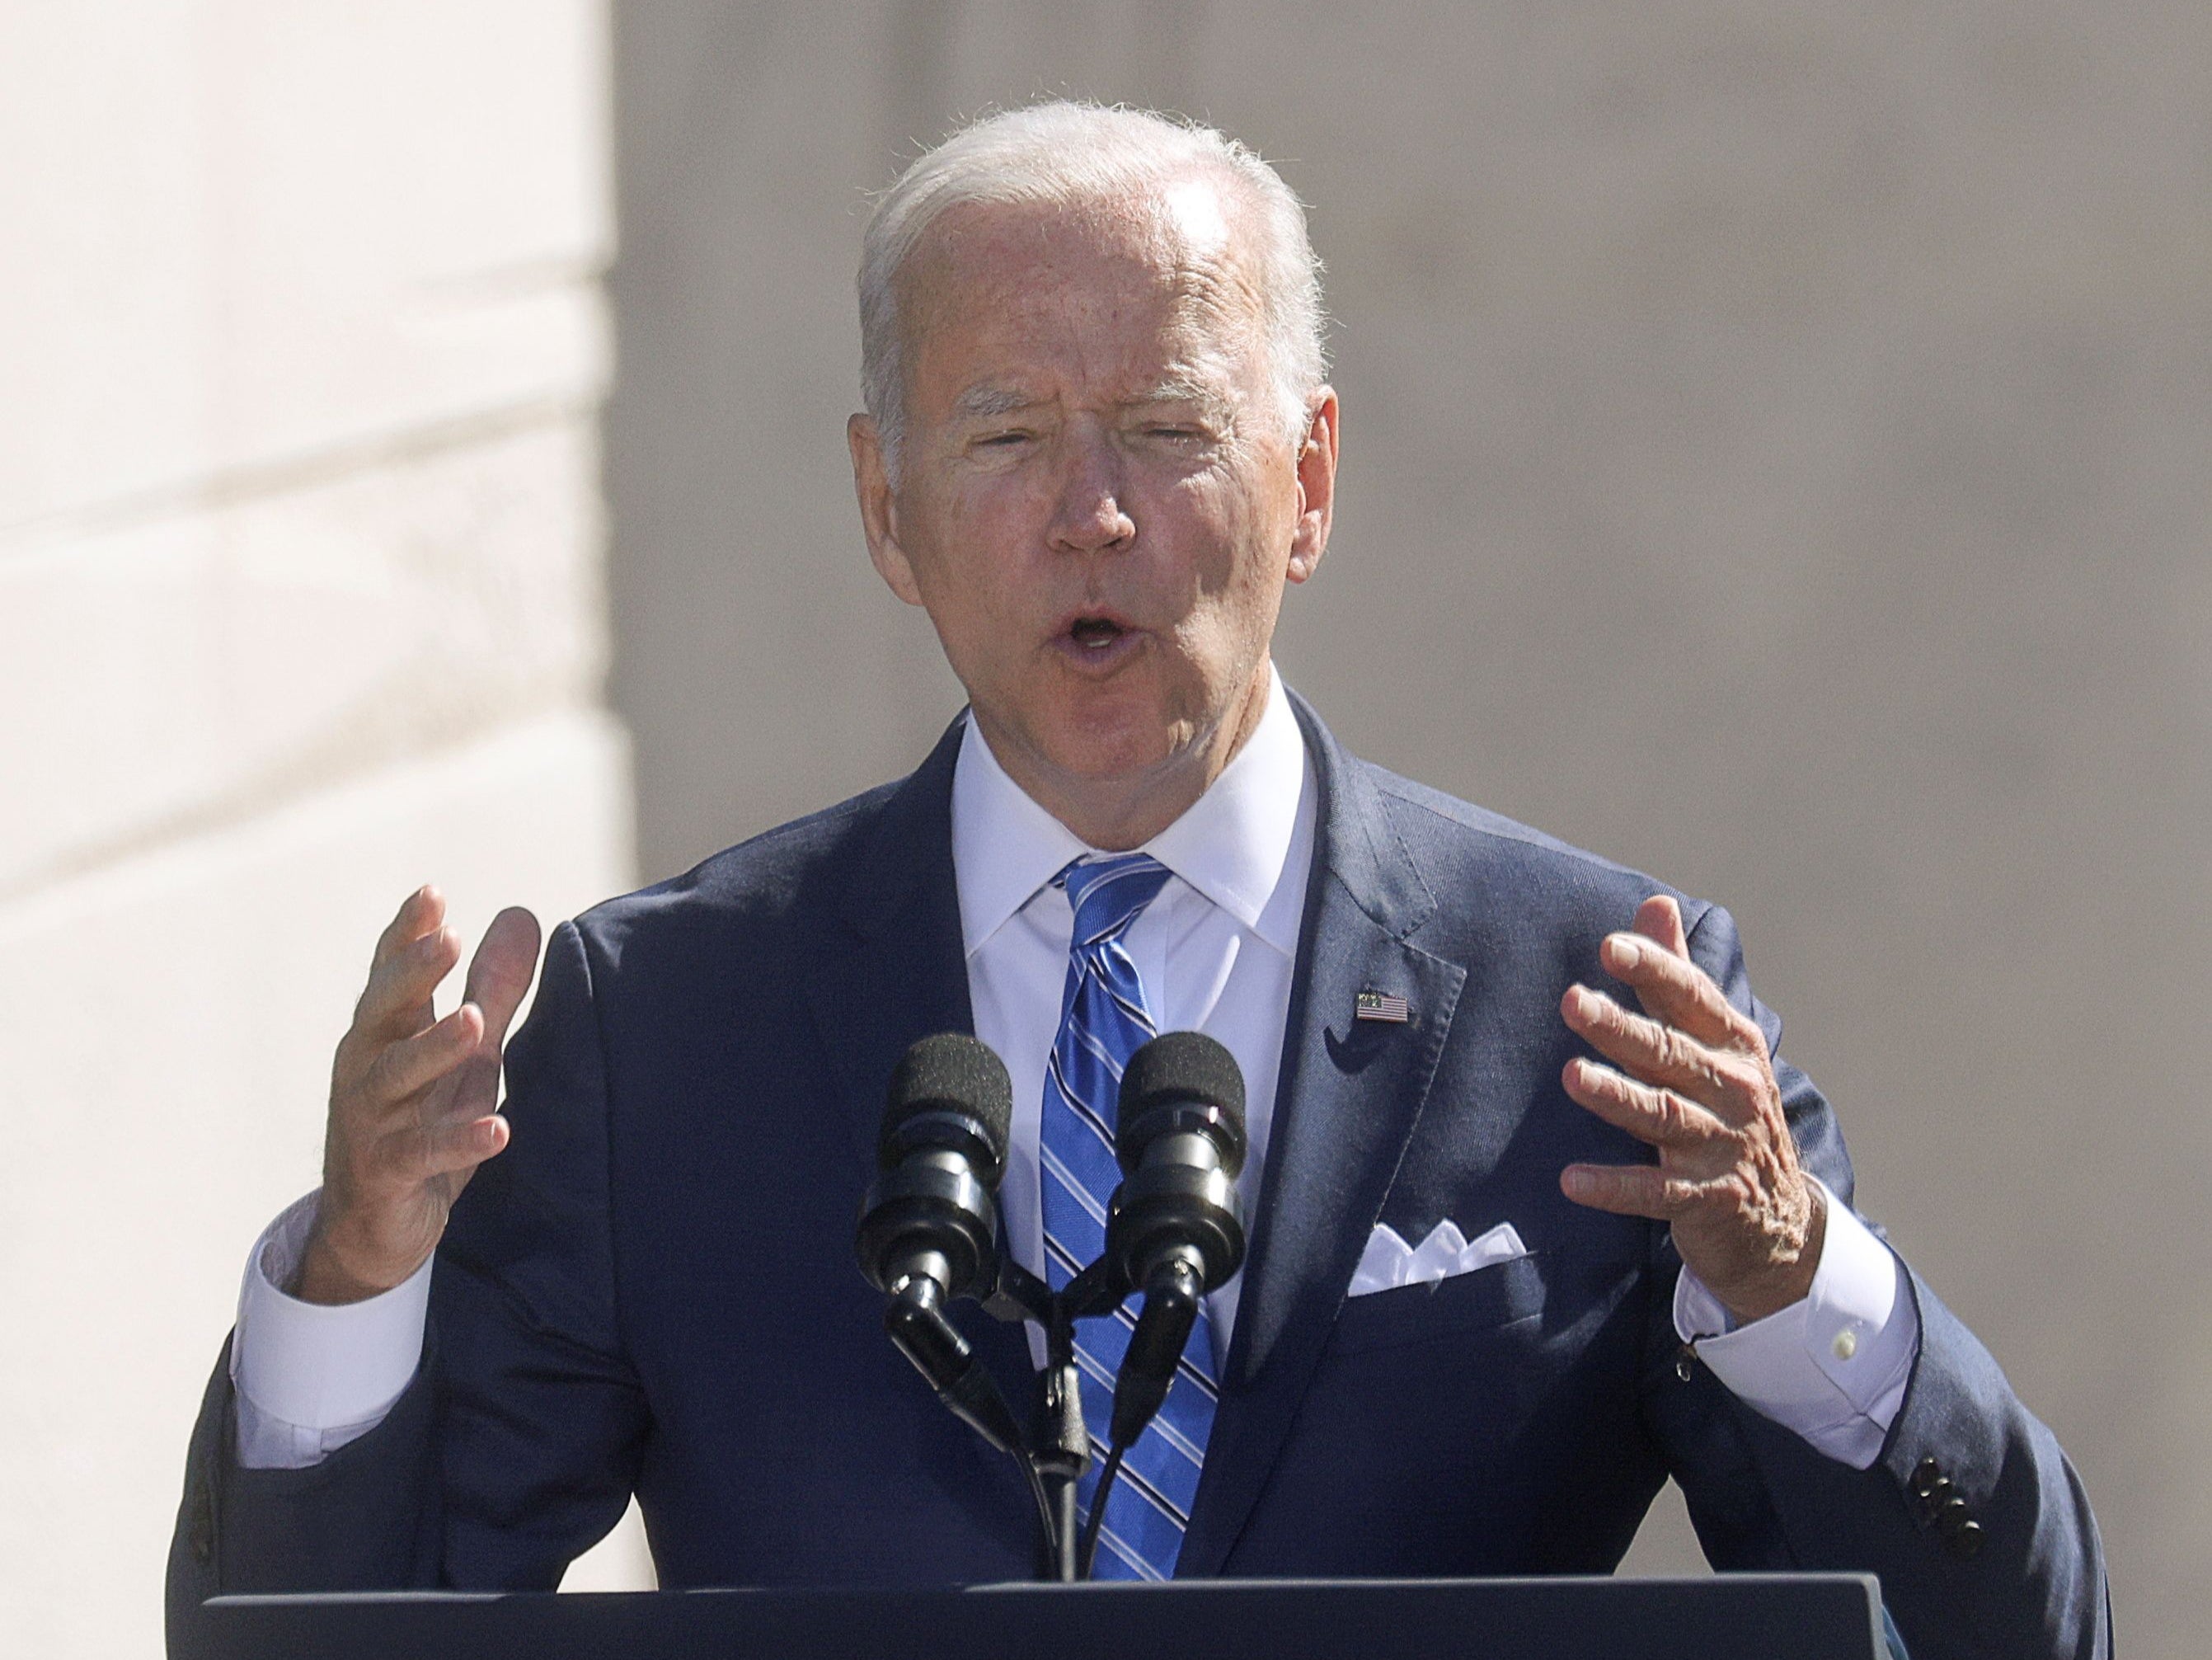 Biden said some documents will be released on December 15 of this year, but not earlier